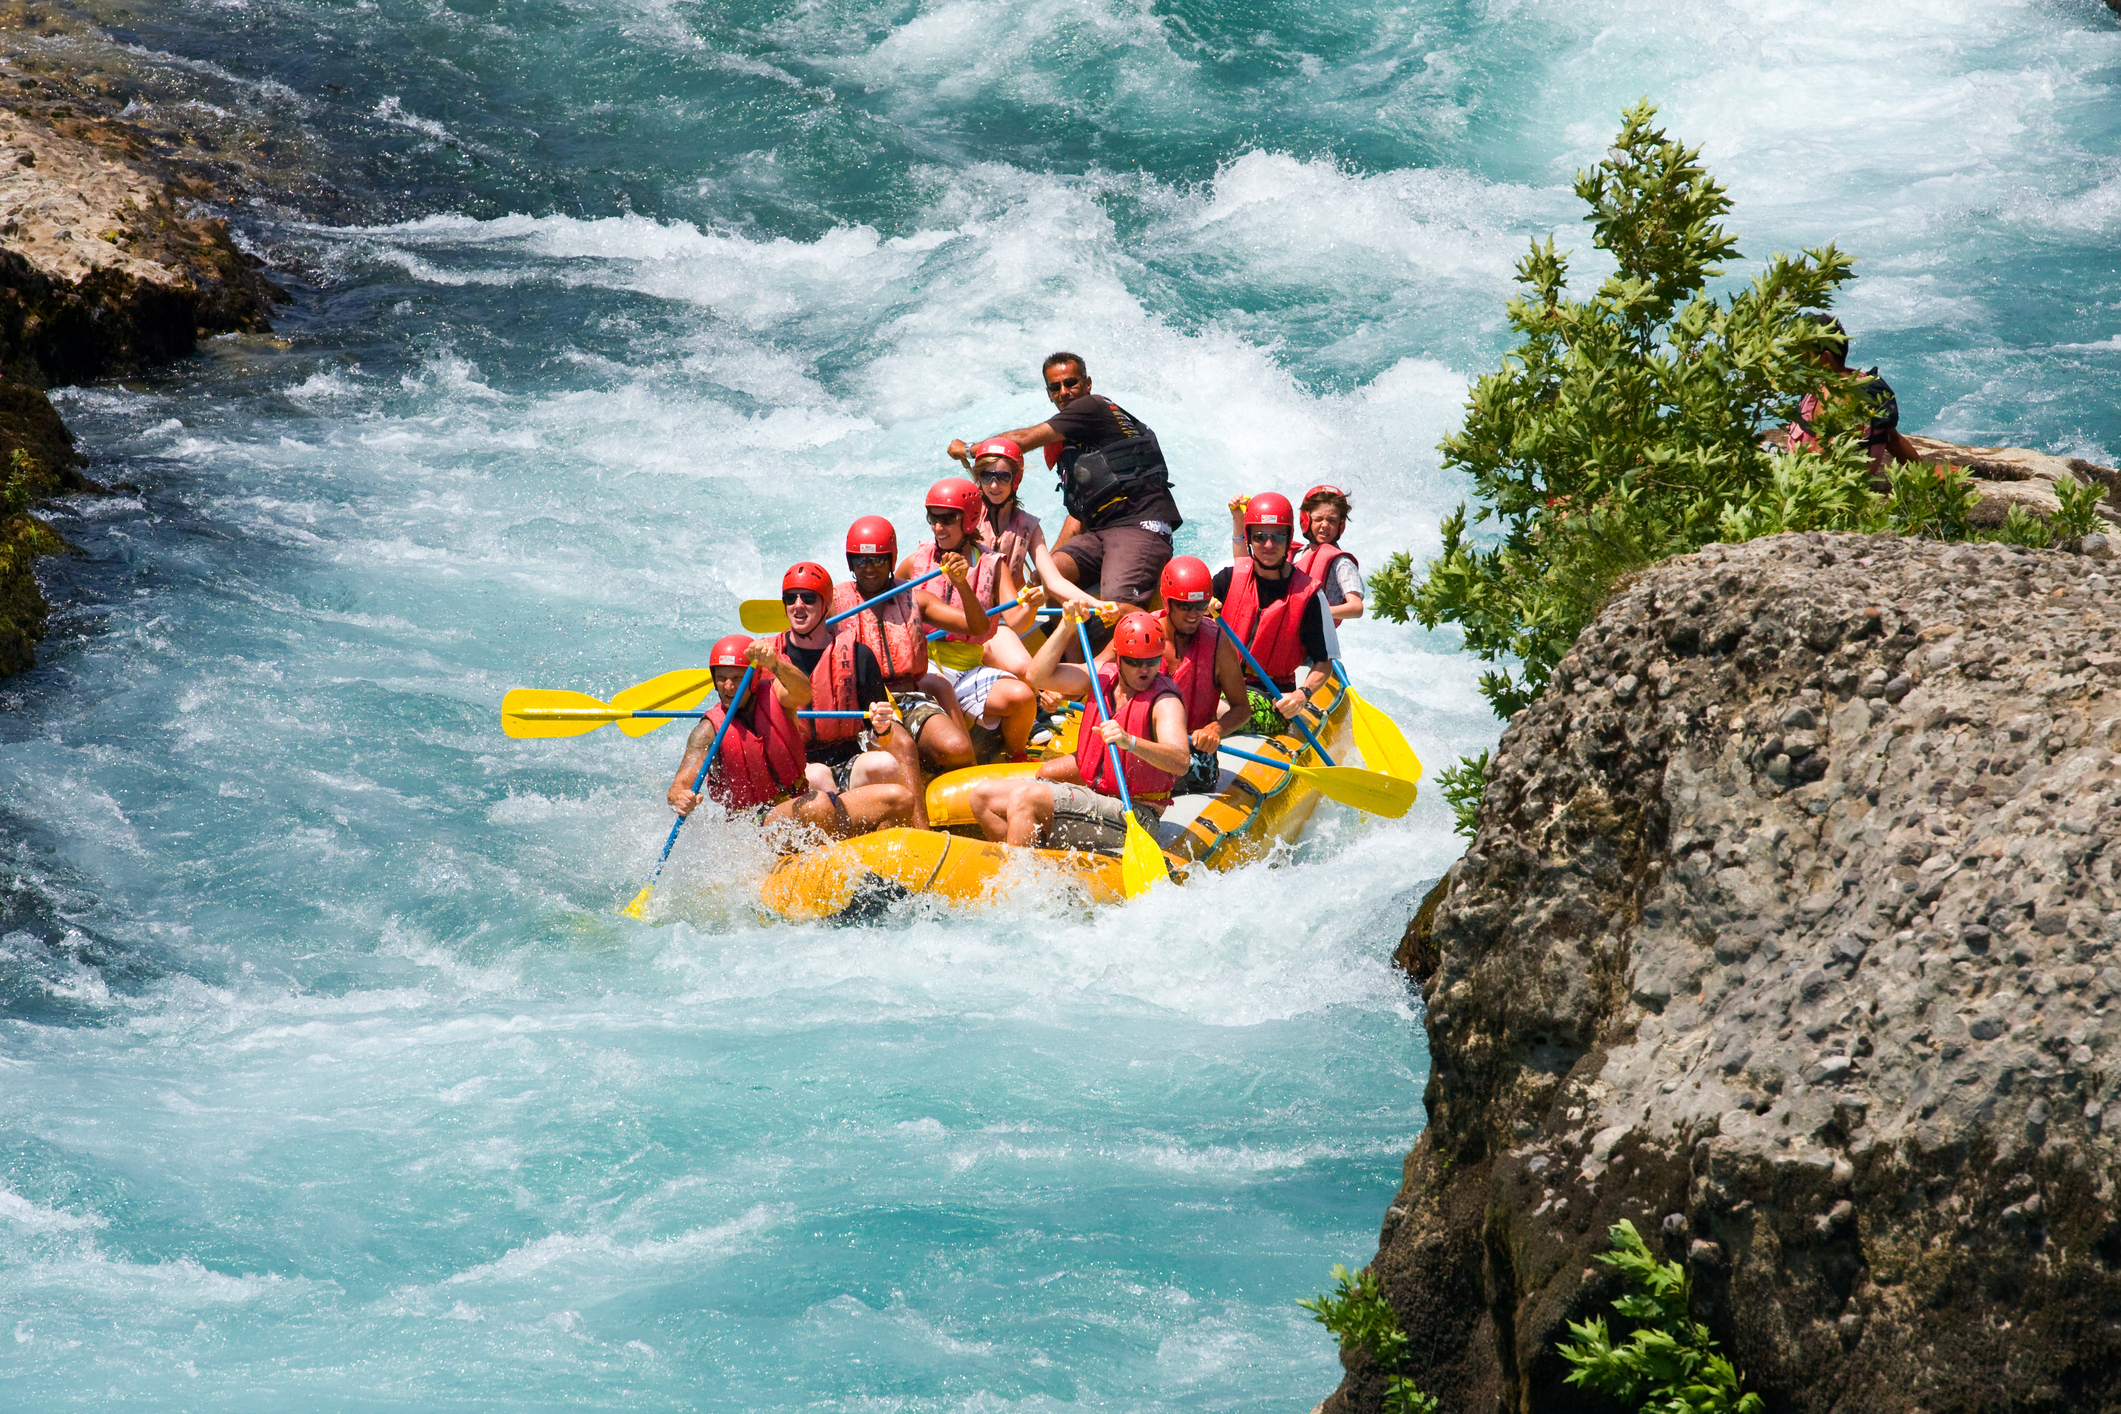 Whitewater Rafting: Catch a Wave on Scenic Rivers